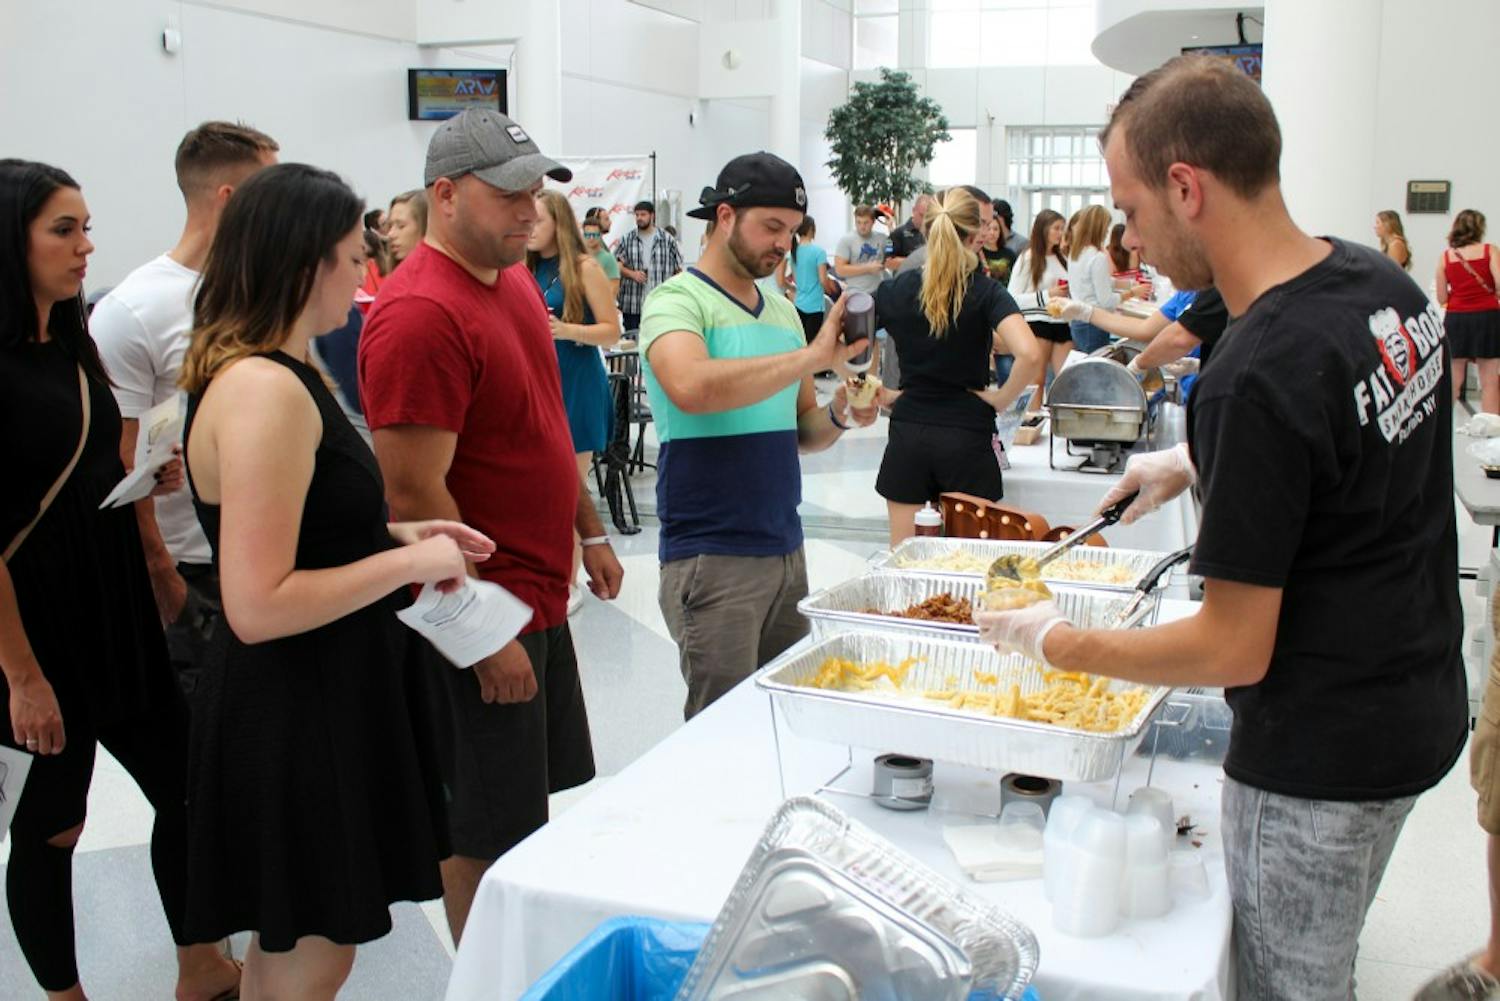 There were 11 competitors in the "Mac Attack" competition, including Mooney’s, The Press Box and Protocol Restaurant. The event was held in CFA seating area, with vendors lining the walls serving small cups of mac and cheese to attendees.